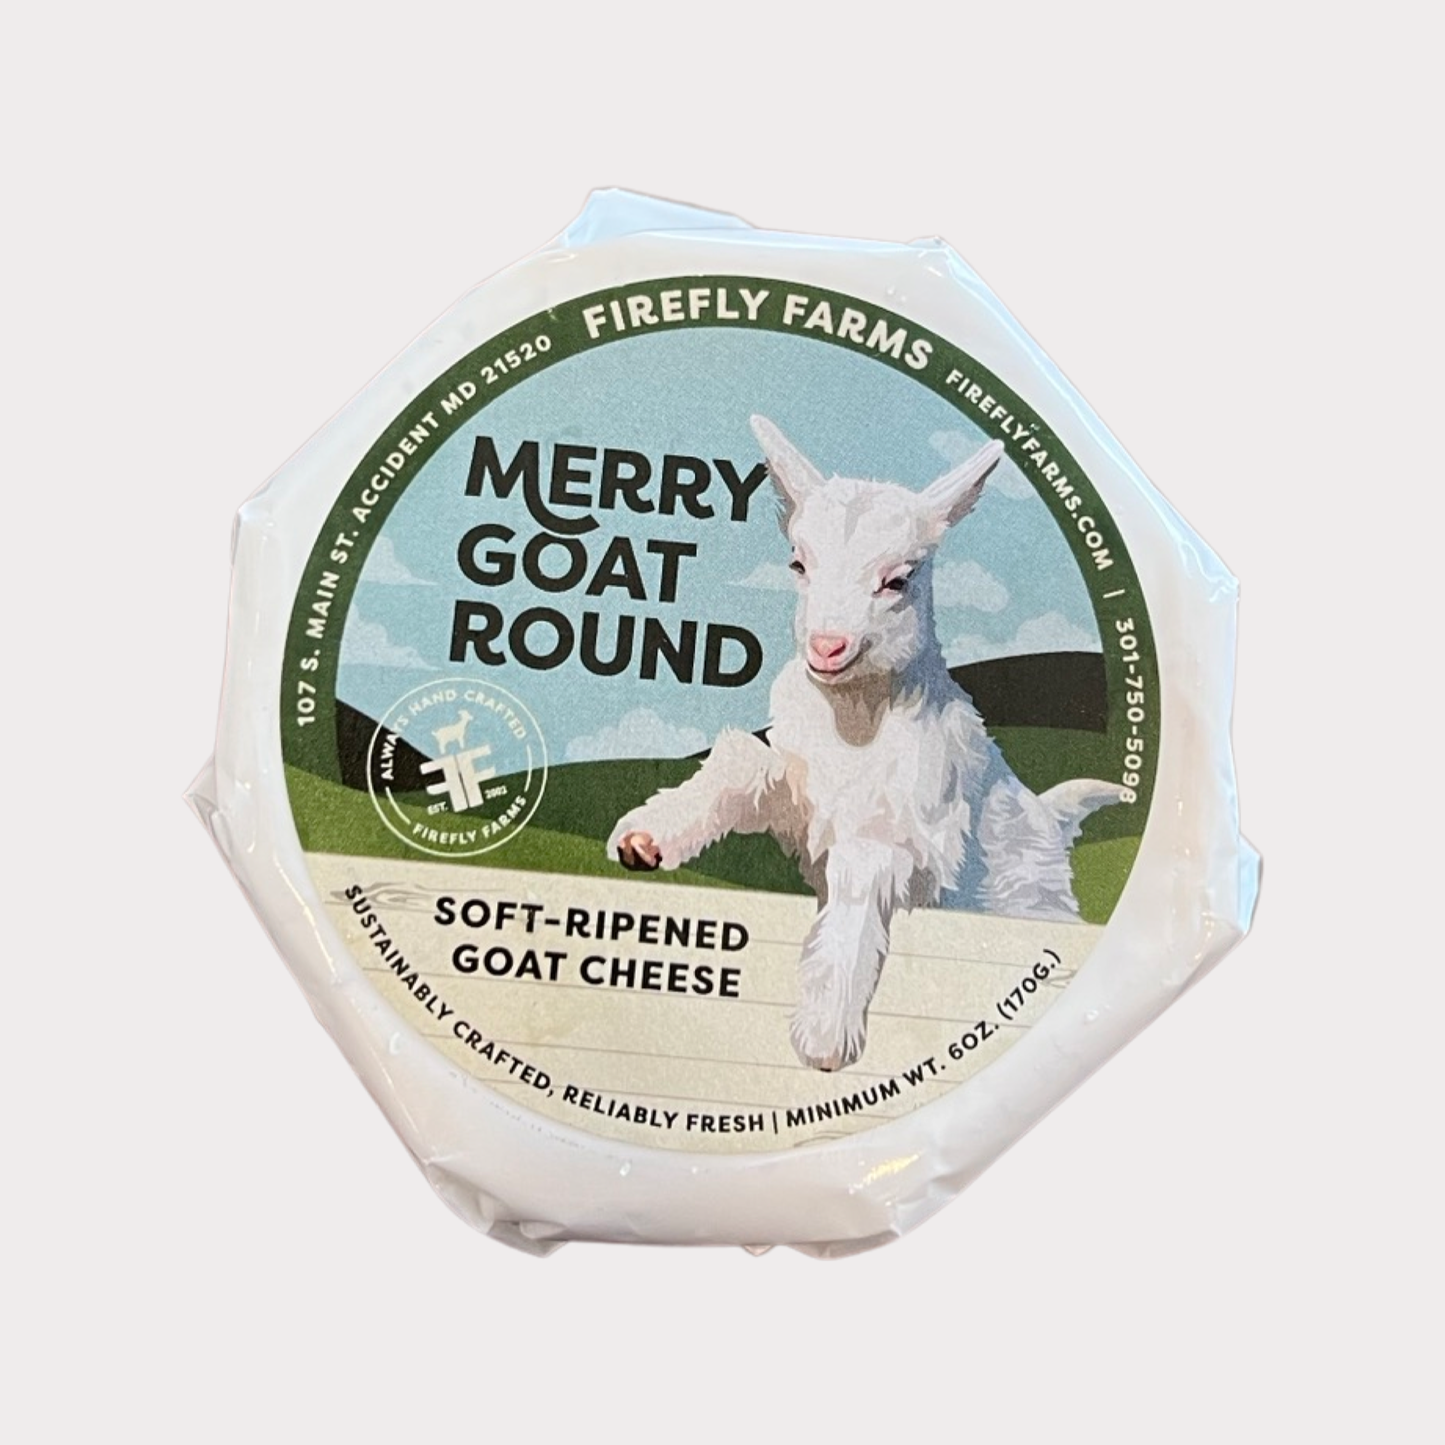 Merry Goat Round Firefly Farms